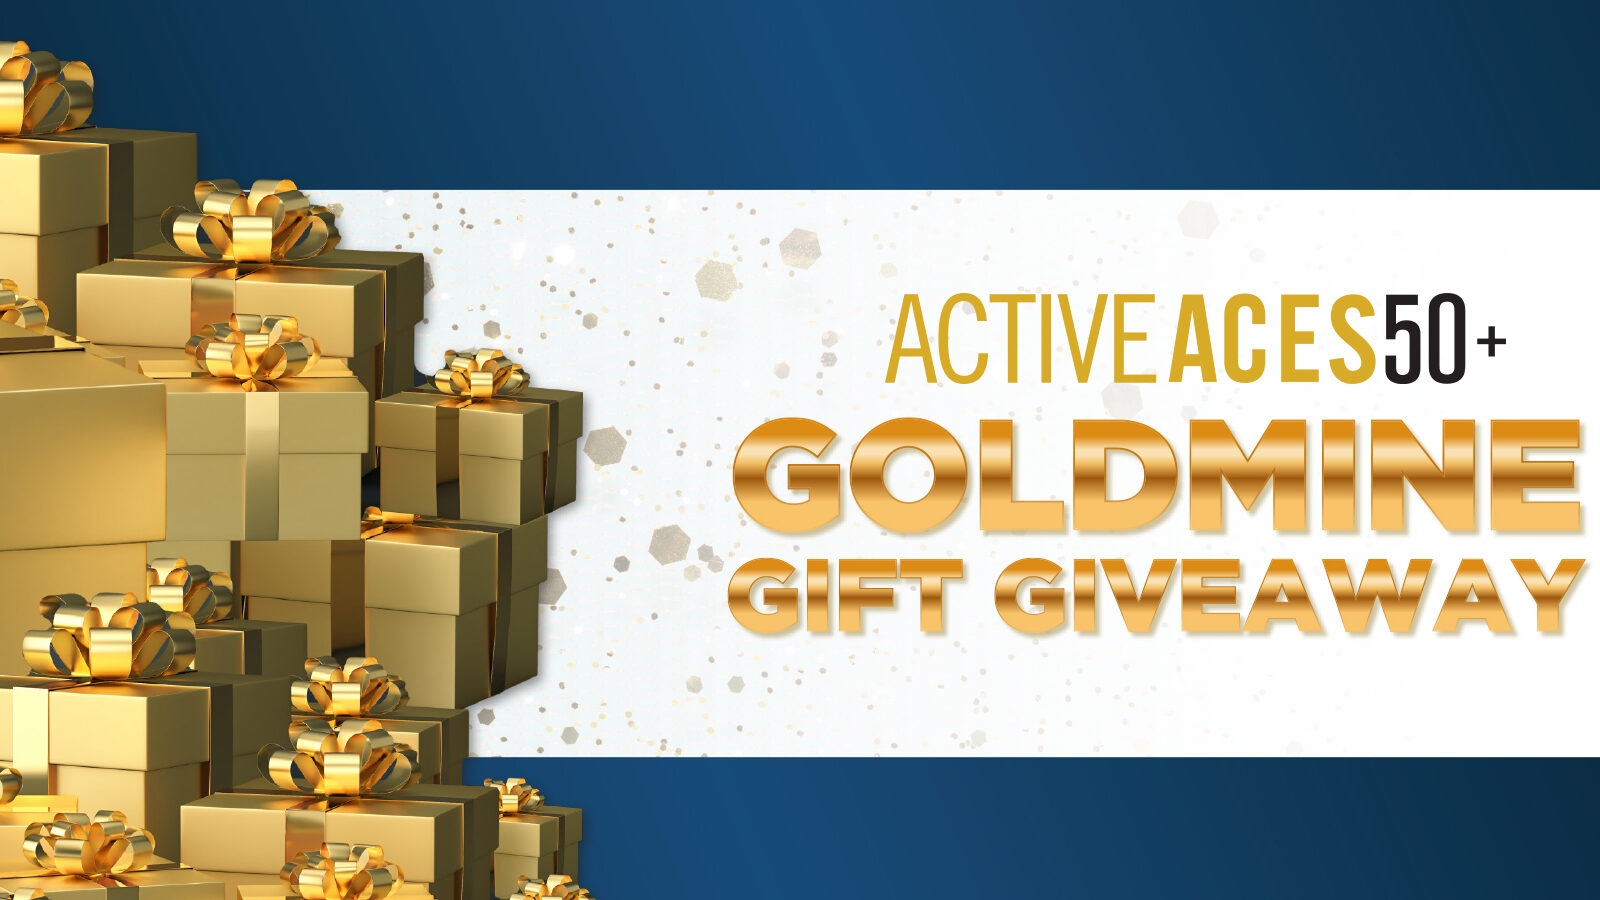 ACTIVE ACES! ALL NEW Goldmine Gift Giveaway